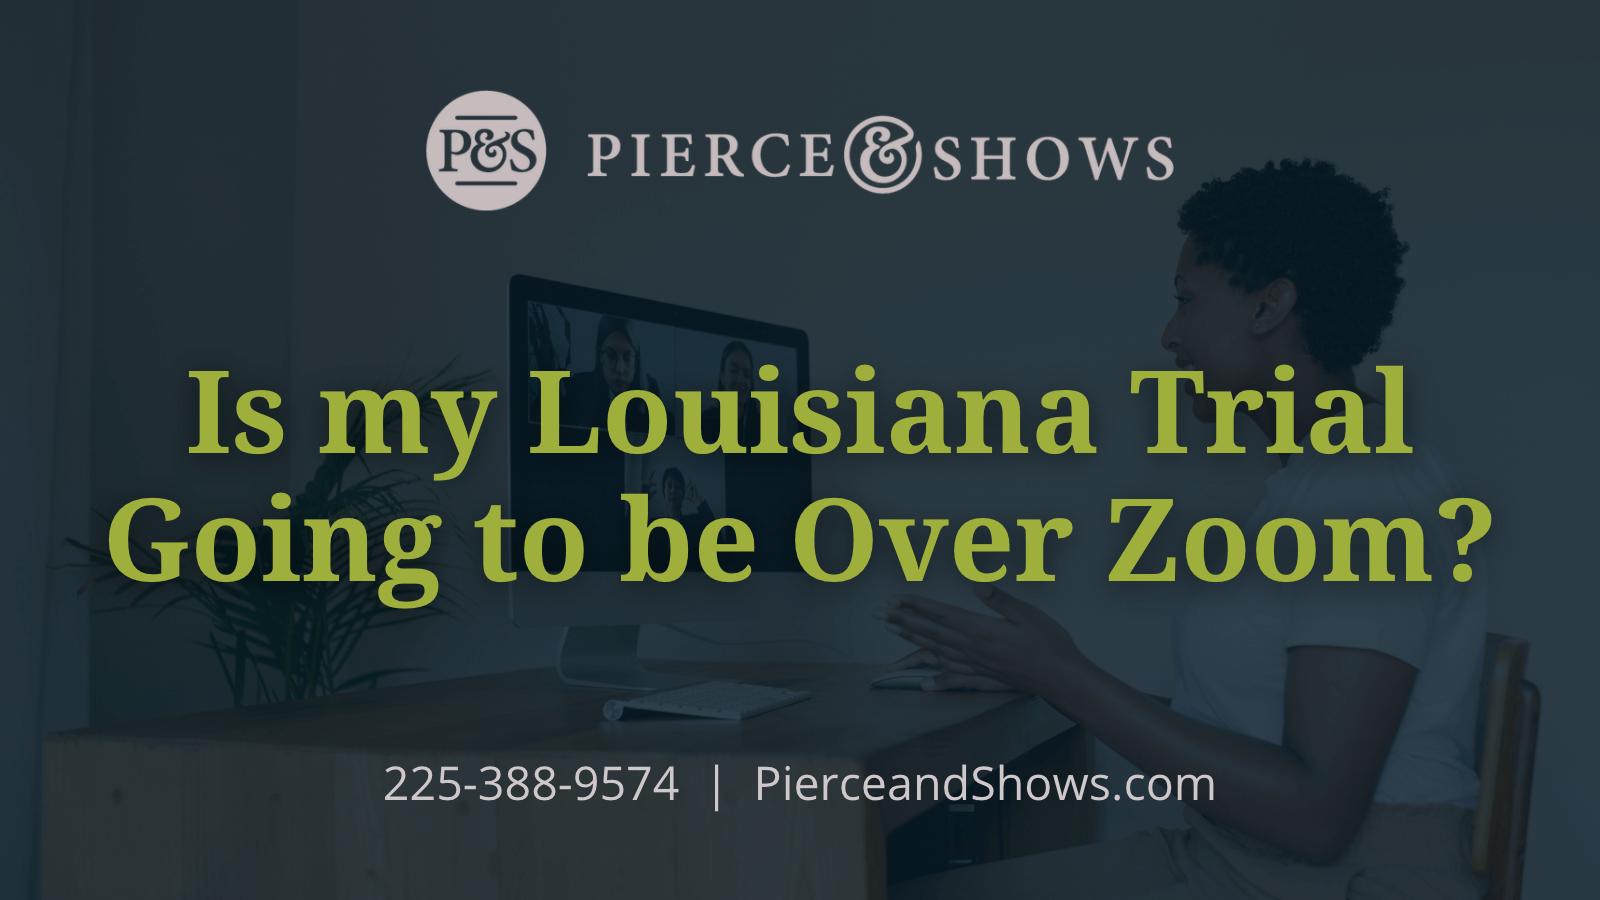 Is my Louisiana Trial Going to be Over Zoom - Baton Rouge Louisiana injury attorney Pierce & Shows